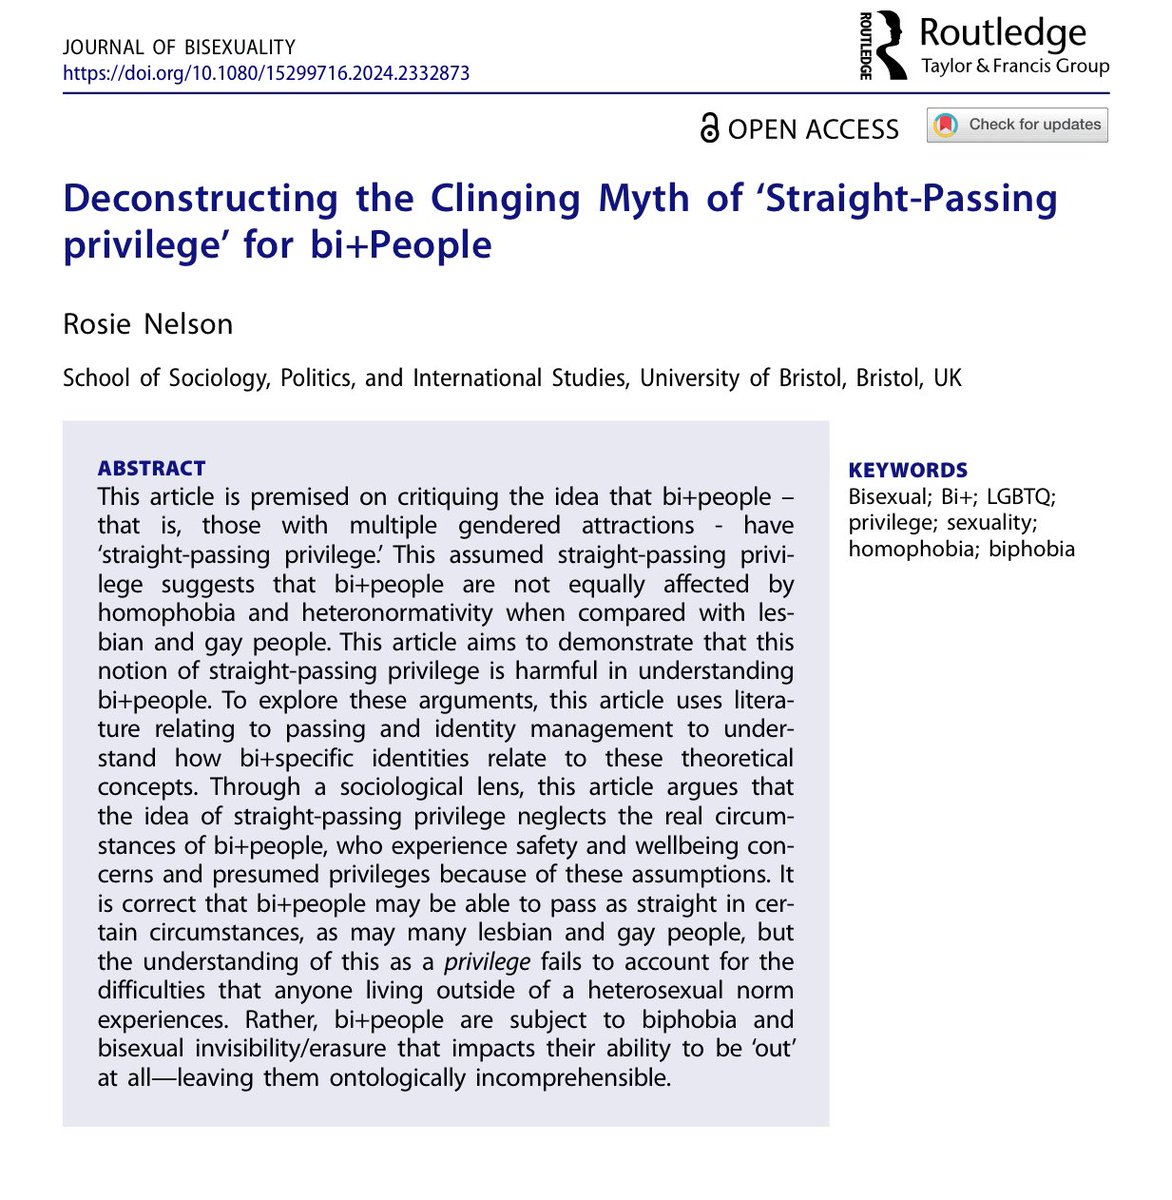 My newest article - ‘Deconstructing the clinging myth of straight passing privilege for bi+ people’ - is now available at the Journal of Bisexuality (@bisexualscience @SPAISBristol)